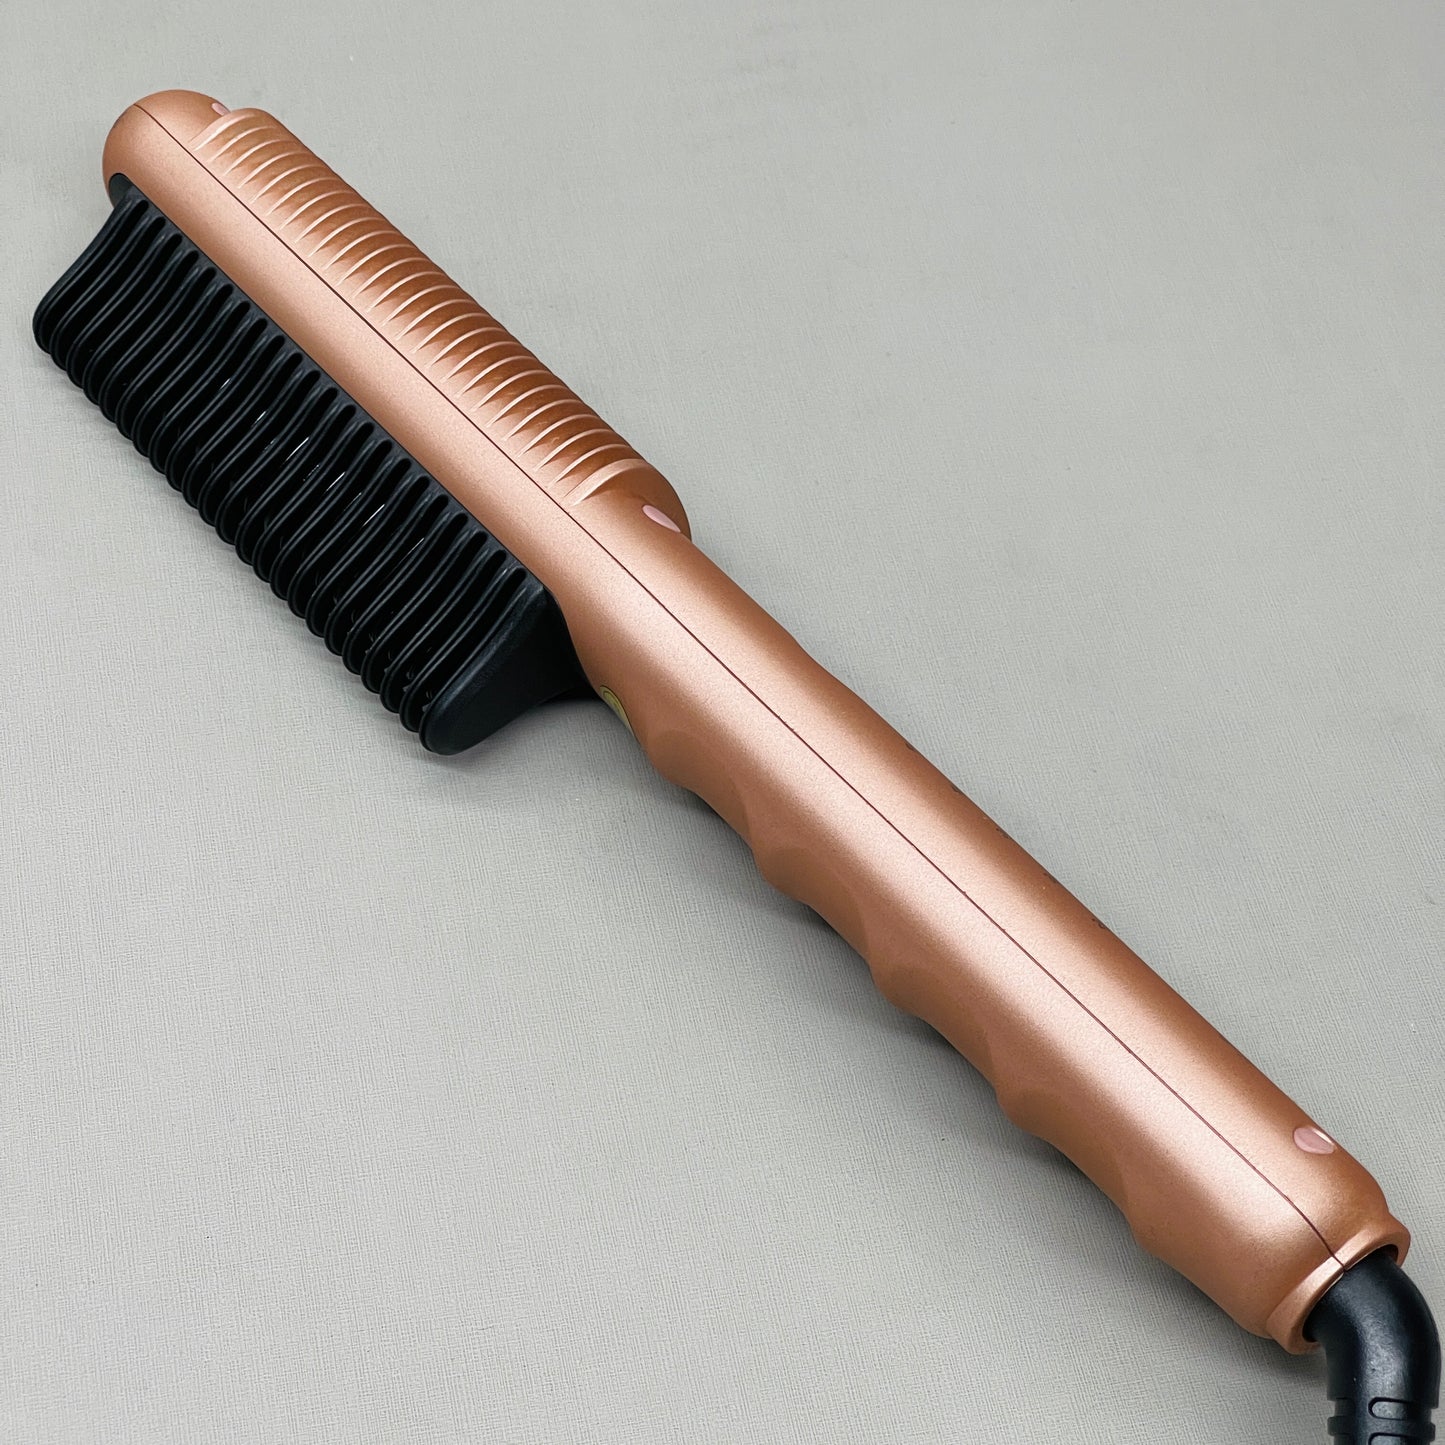 SOLEIL Styling Comb Ionic Flexible Guard 450° Rose Gold L40HBS-M39 MSRP $375 (New)